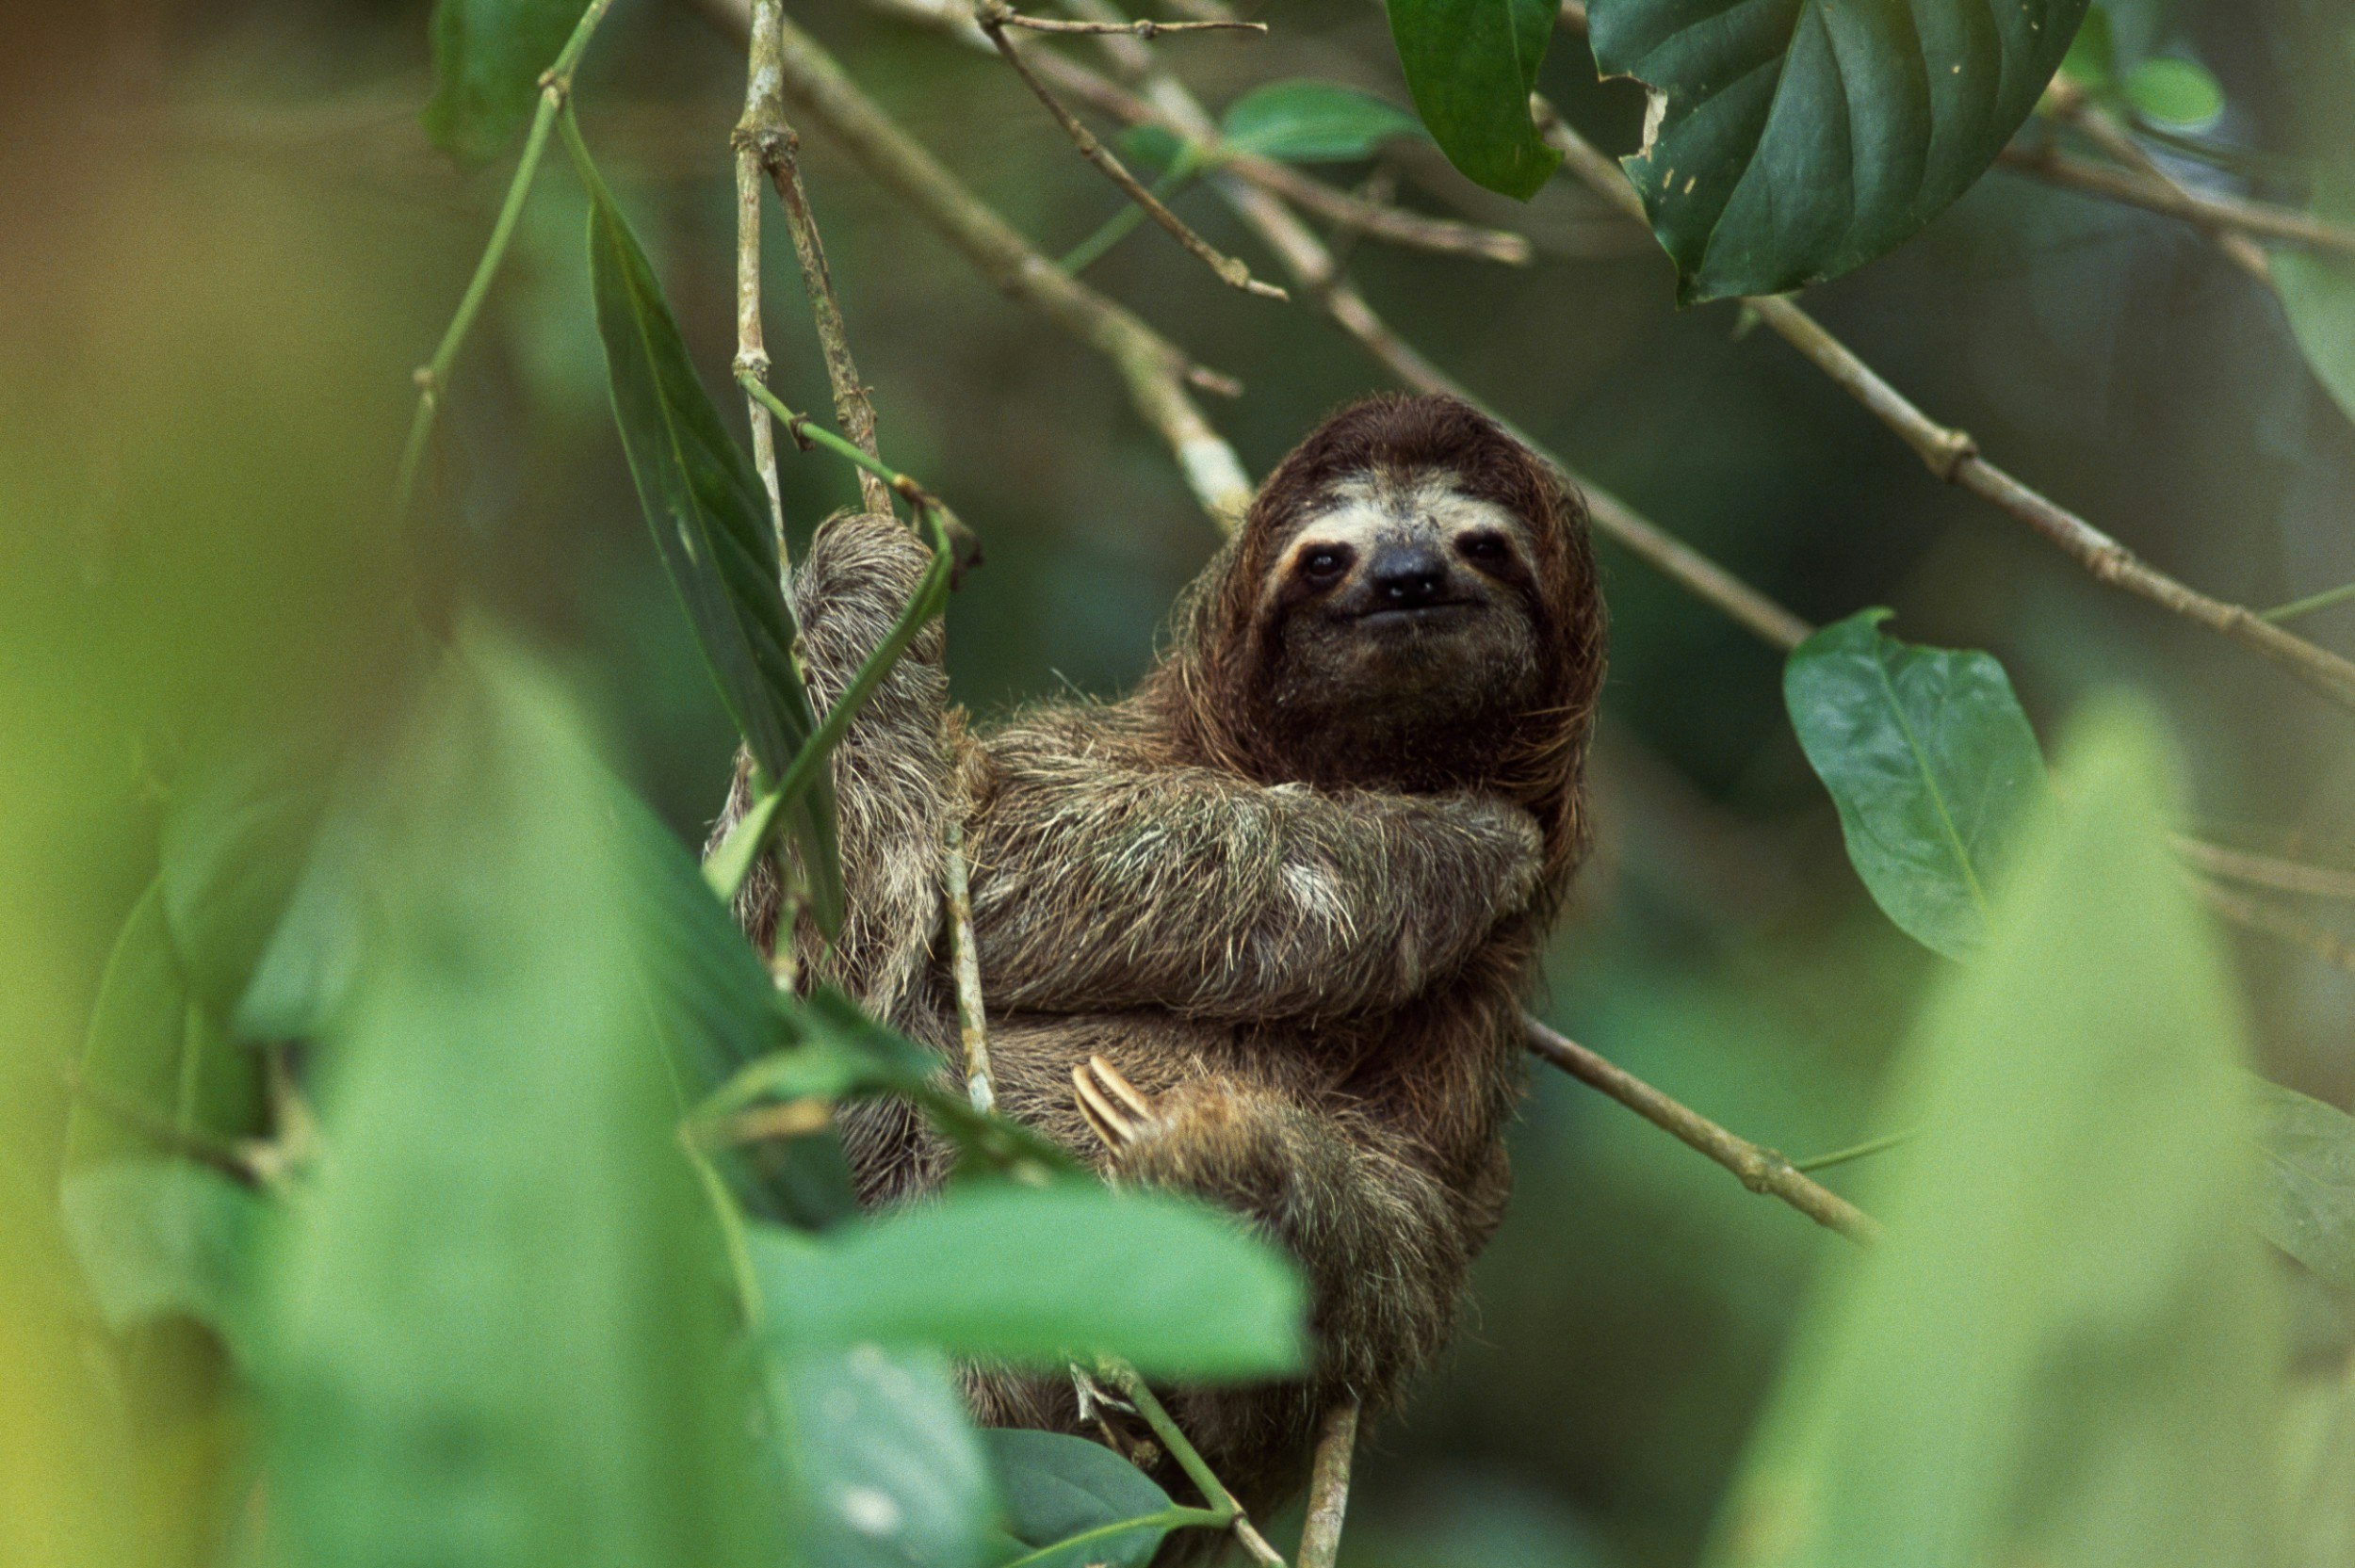 A pale-throated sloth Bradypodidae in Cahuita National Park in Costa Rica